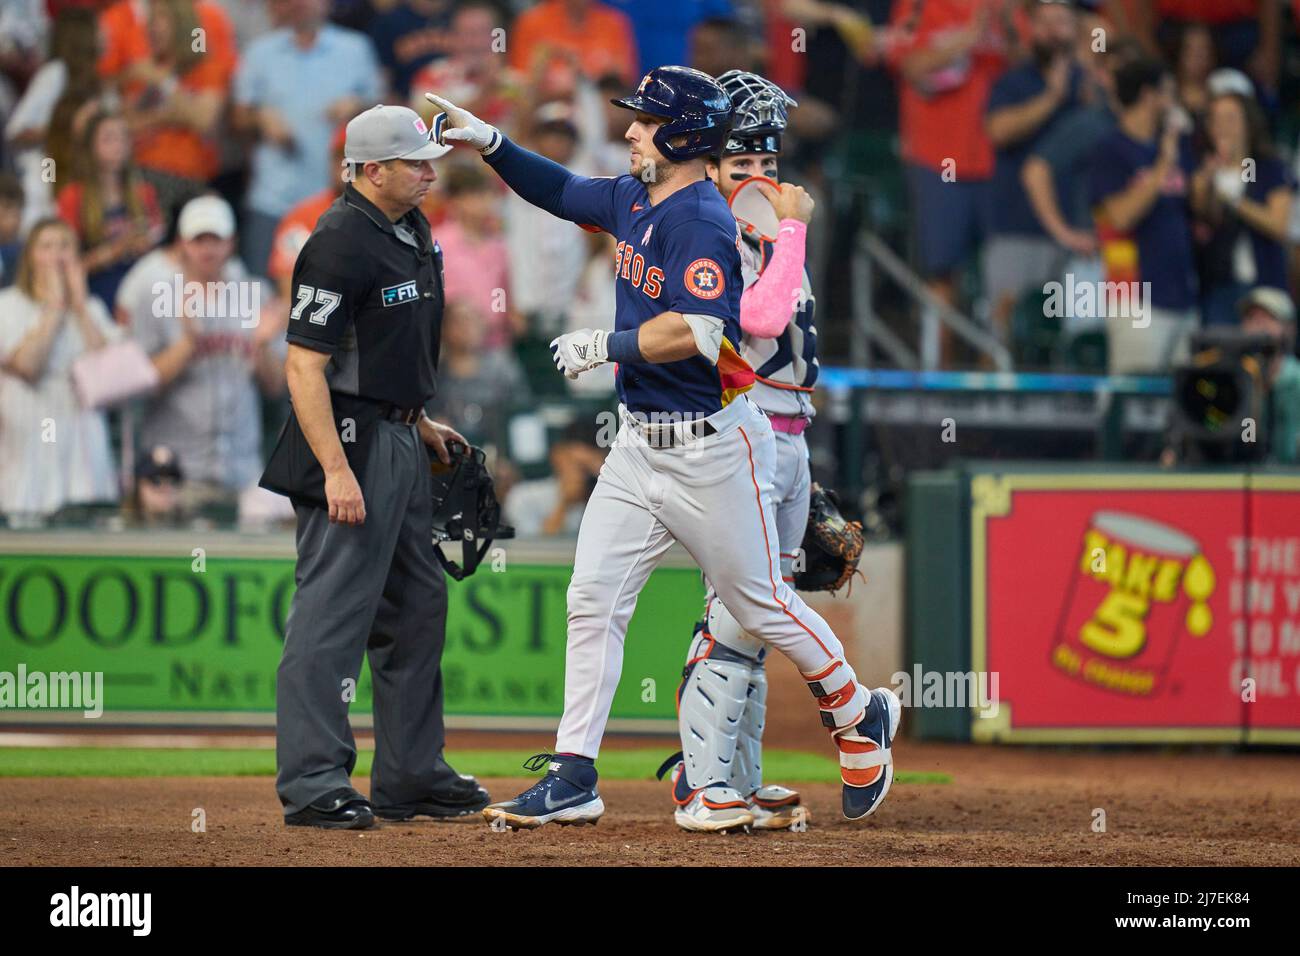 Houston Tx. 08/05/2022, May 8 2022: Houston third baseman Alex Bergman (2) this a homer during the game with Detroit Tigers and Houston Astros held at Minute Maid Park in Houston Tx. David Seelig/Cal Sport Medi Stock Photo